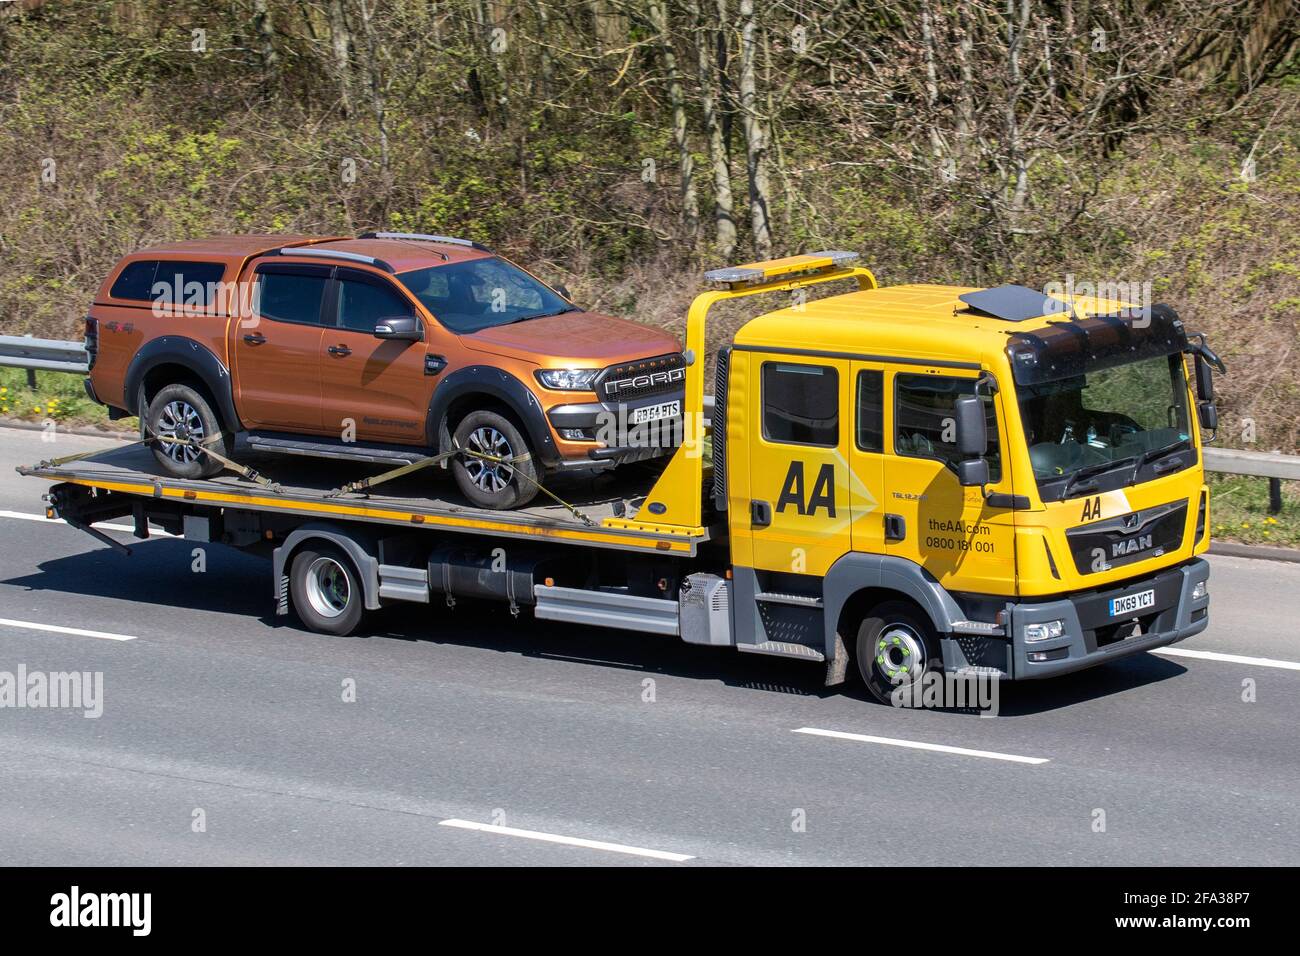 AA, roadside assistance for 2918 Ford Ranger Wildtrak 4x4 Tdci,  transporting, commercial, driven, symbol, automobile, way, moving, british, road transport, traffic, drive, driver, AA, breakdown recovery, low loader, British roads, MAN vehicles, driving, vehicle, car, motorway, uk, england, isolated, passenger, passengers, freeway, city, speed, street, in motion, urban, modern, background, traveling, movement, landscape, truck, AA van, highway, traffic lanes, 24hr emergency roadside recovery, double cab, towing equipment,  24/7 Stock Photo